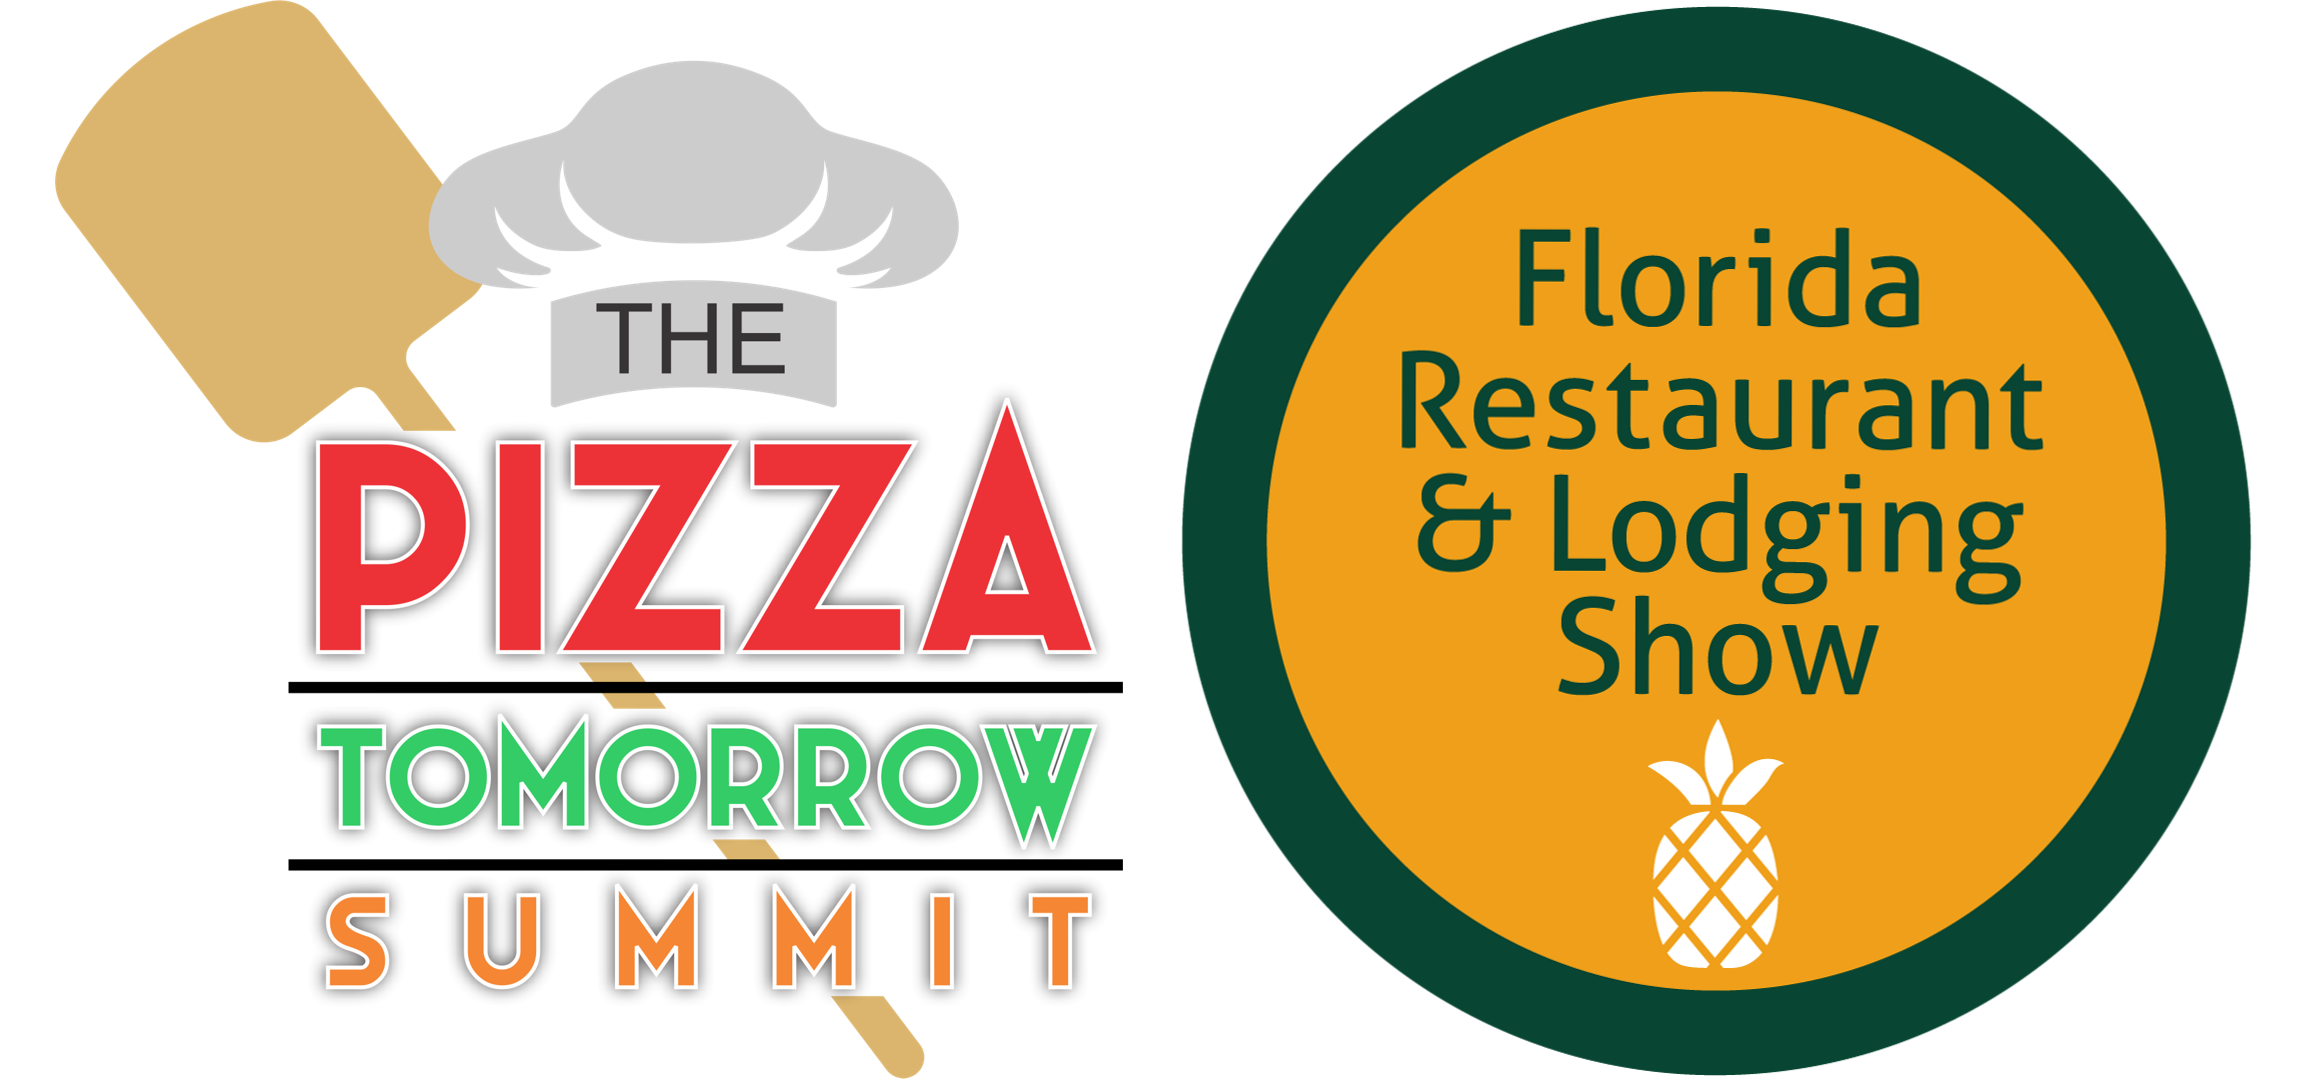 Welcome to The Pizza Tomorrow Summit 2023